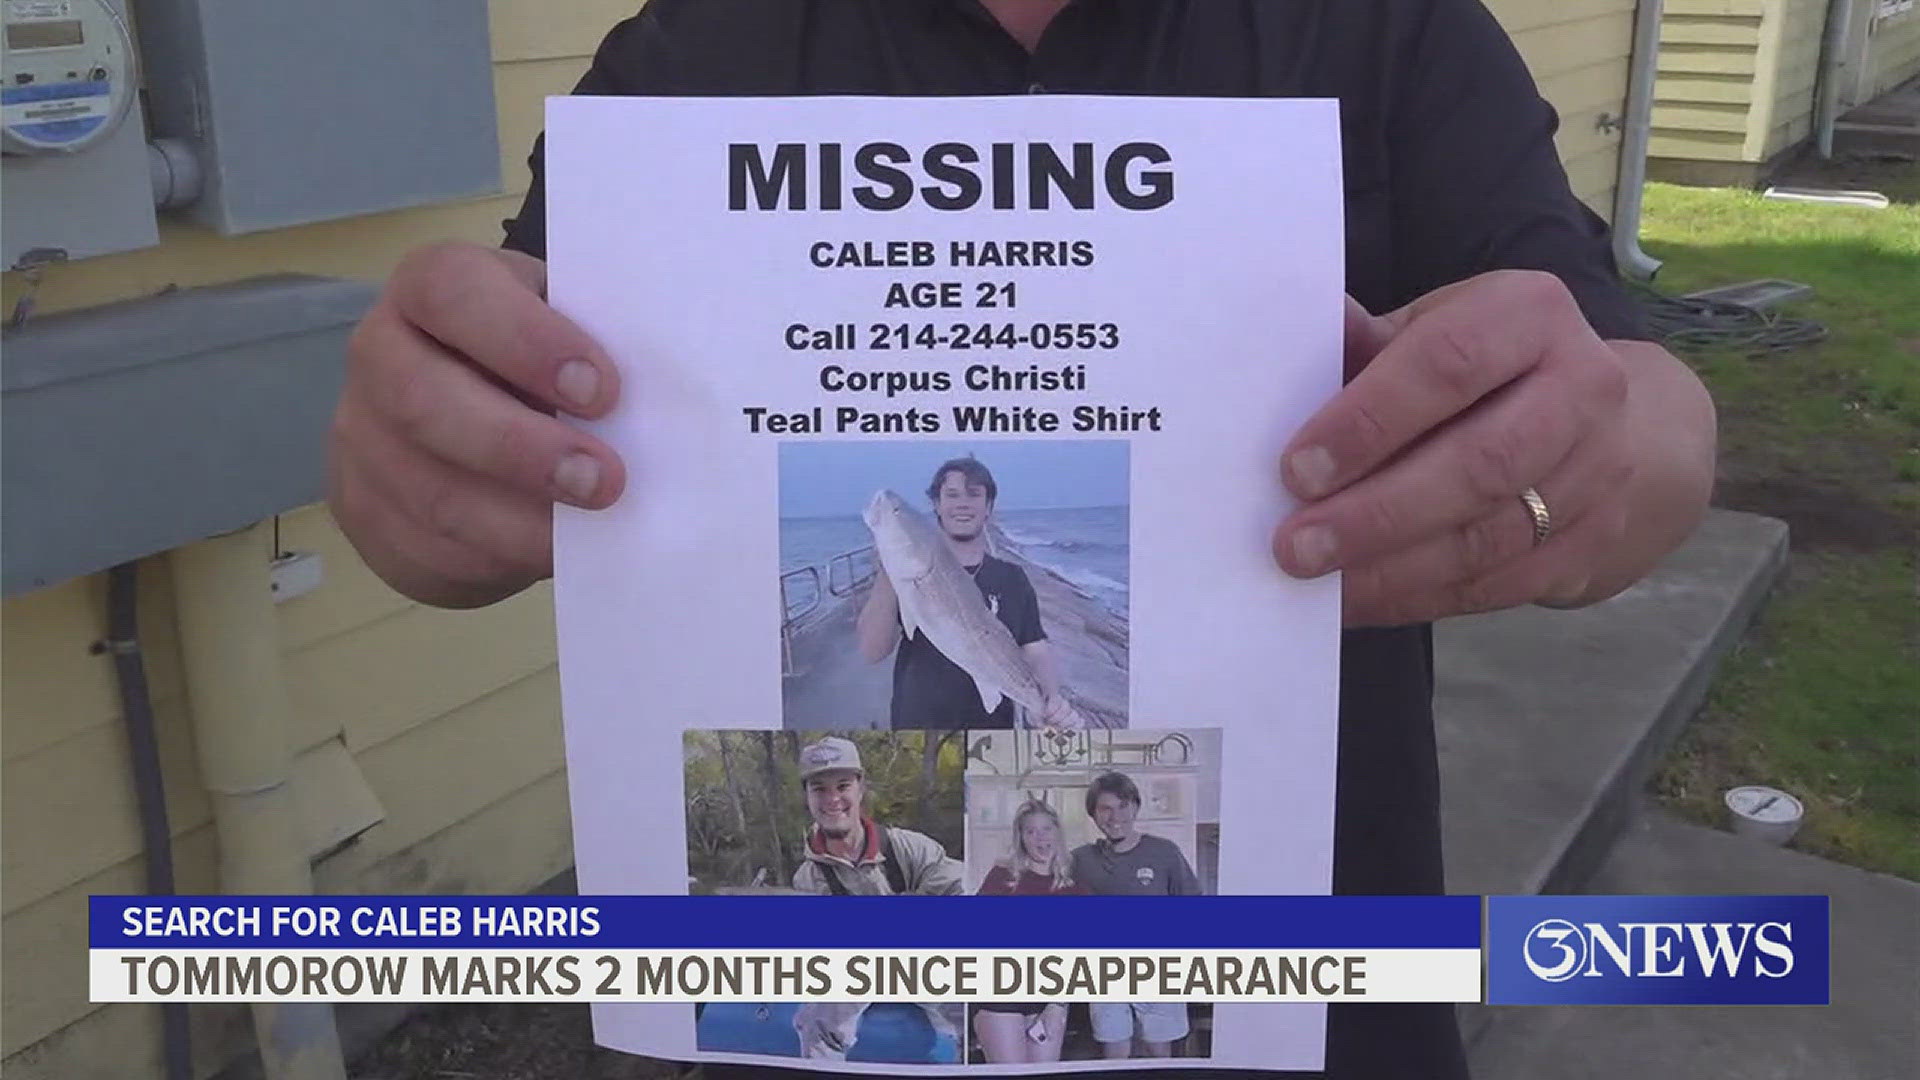 Caleb's father, Randy Harris, told 3NEWS the police investigation into his son's disappearance has not slowed with the Secret Service among those helping find Caleb.